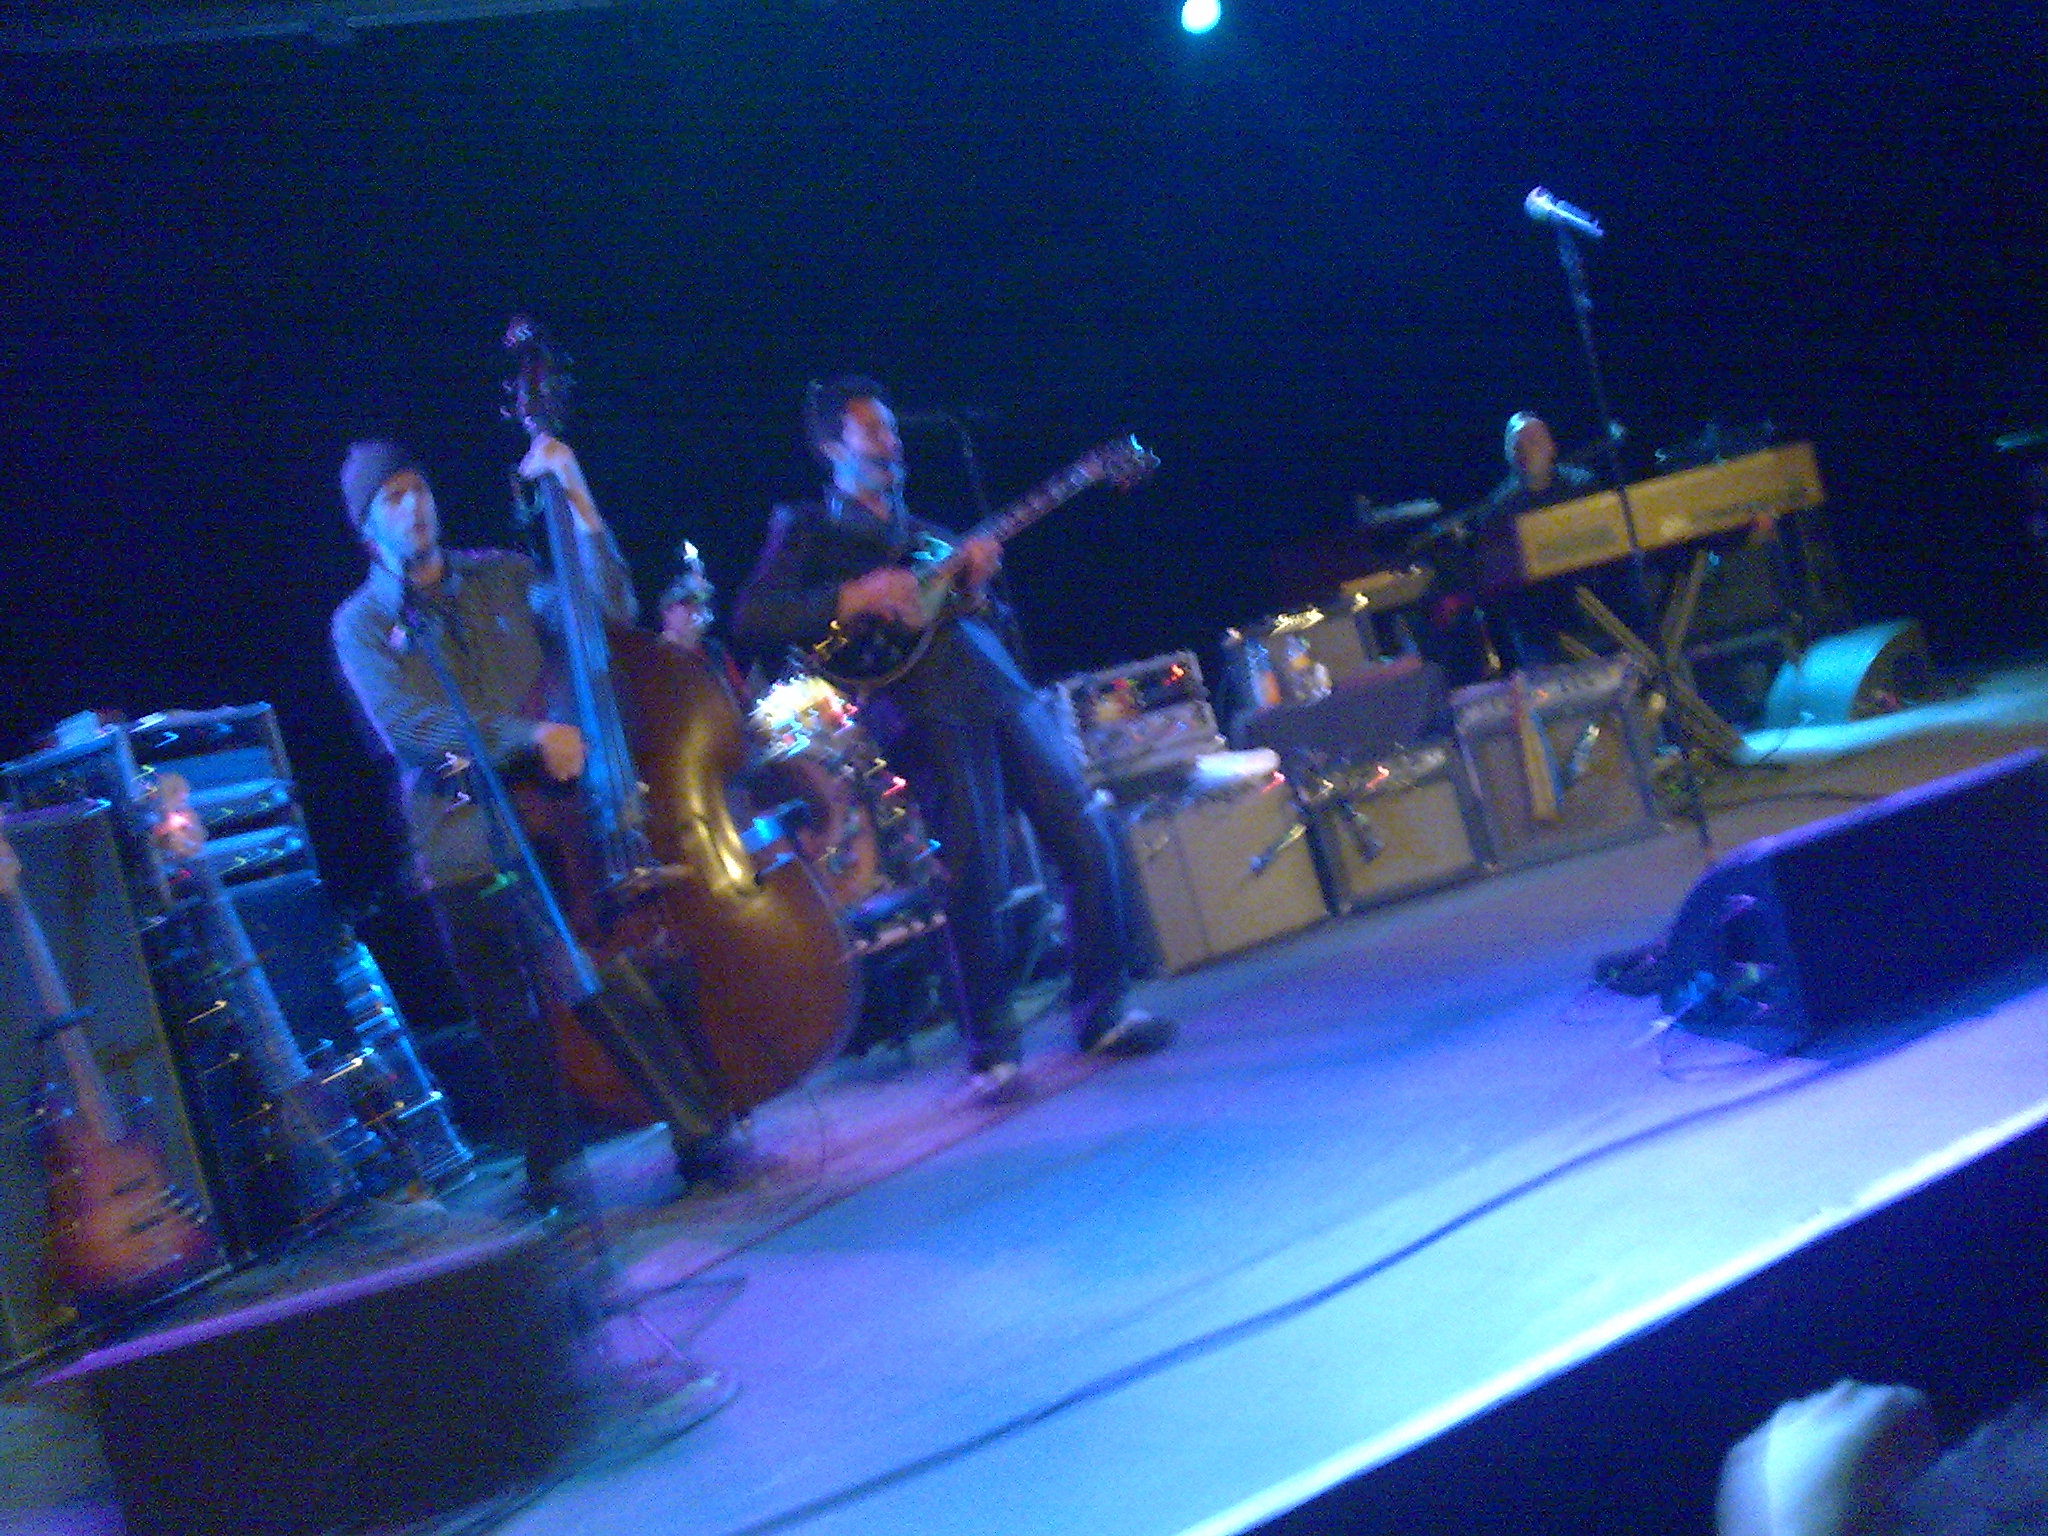 people on a stage singing and playing instruments